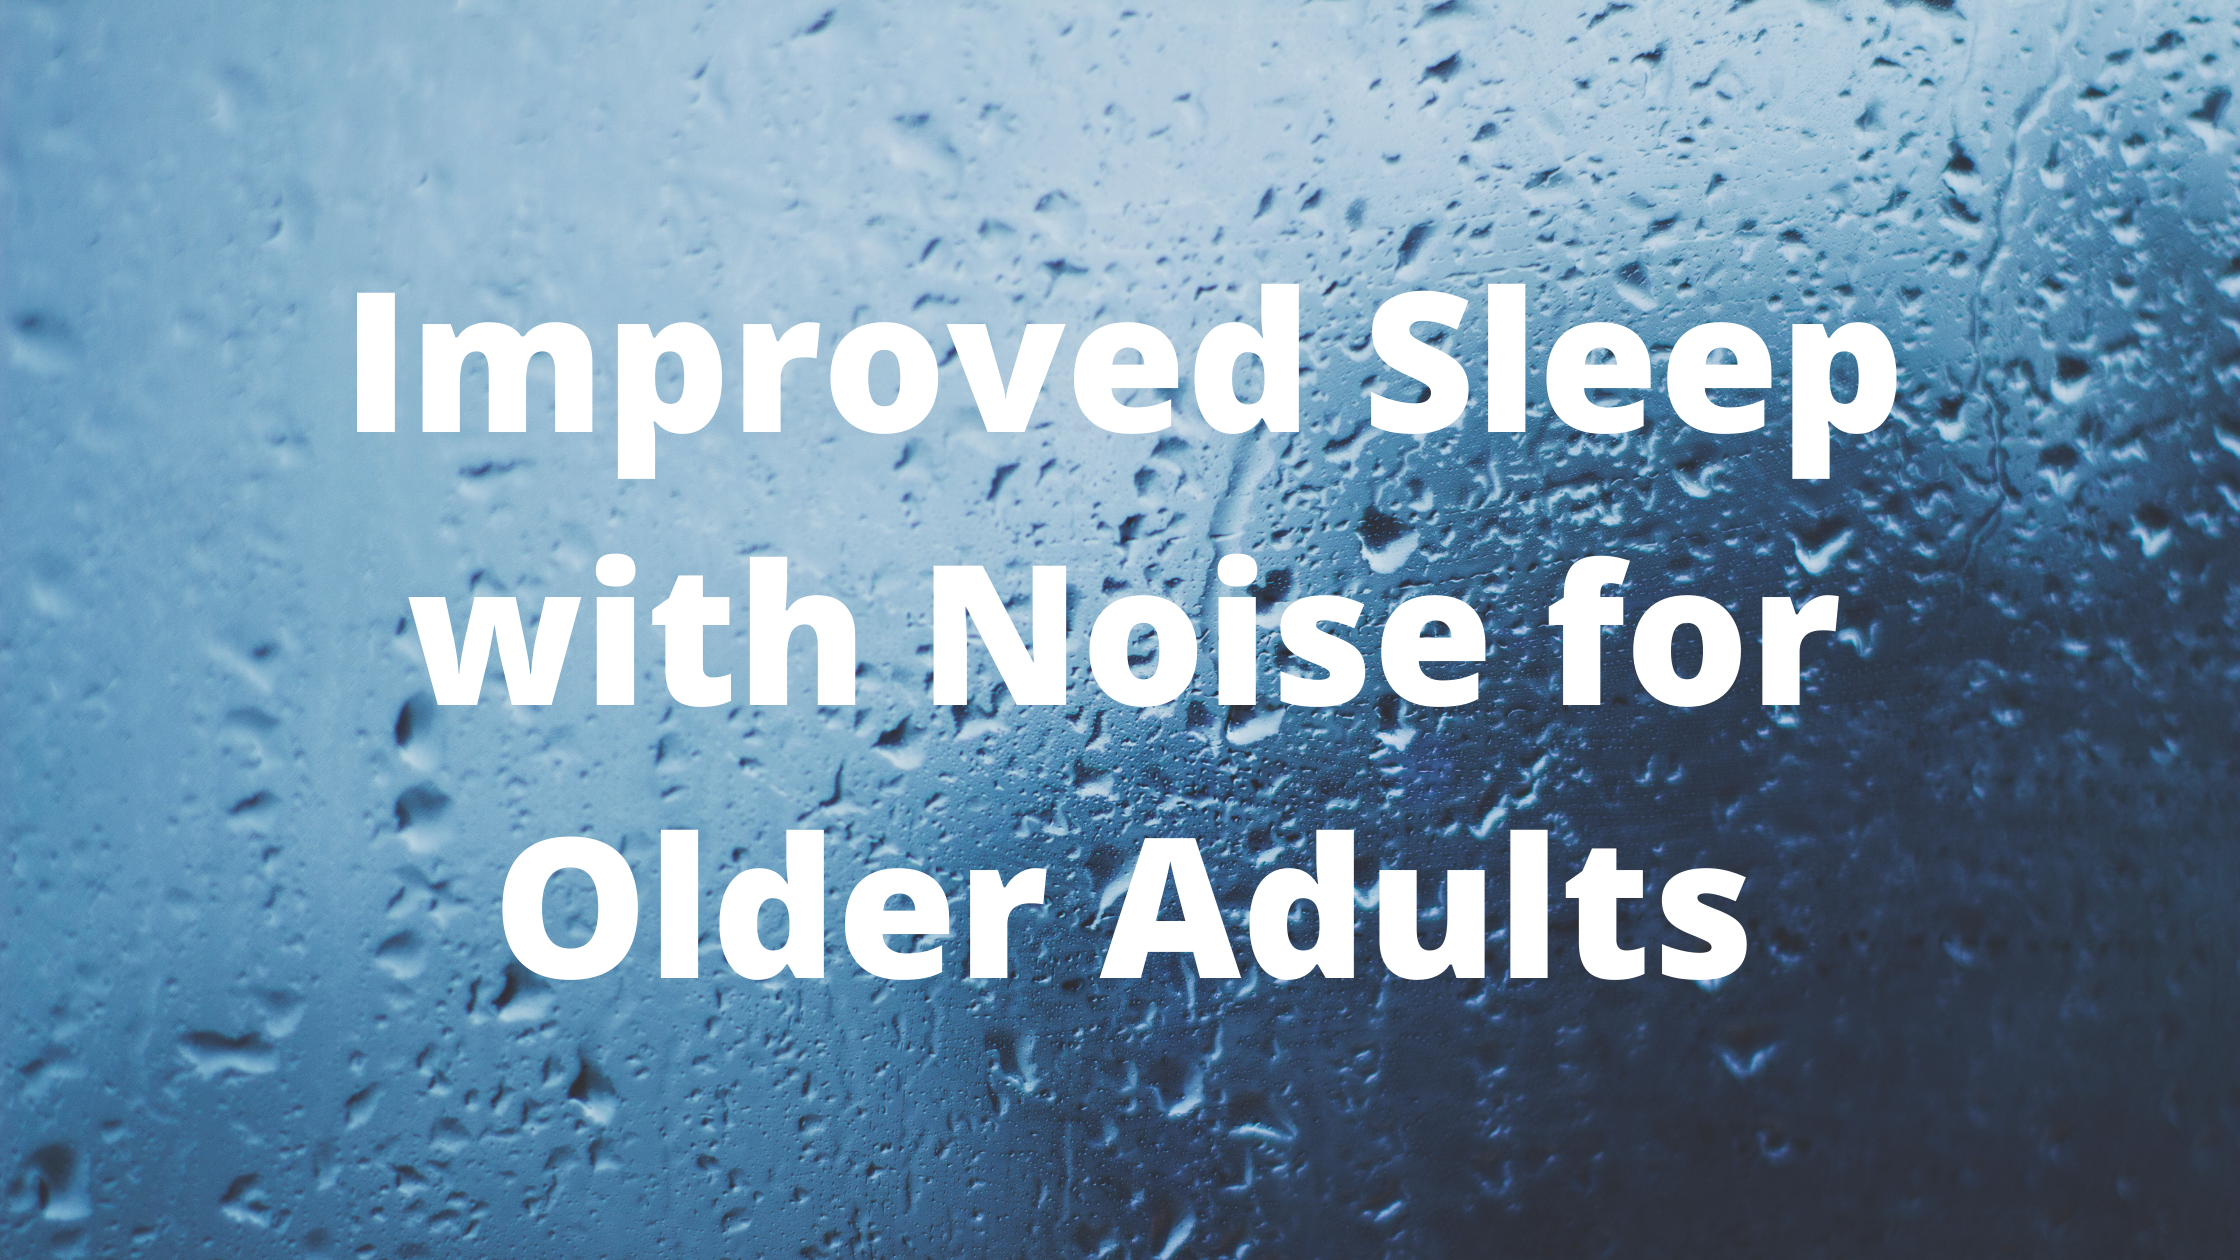 Improved Sleep with Noise for Older Adults